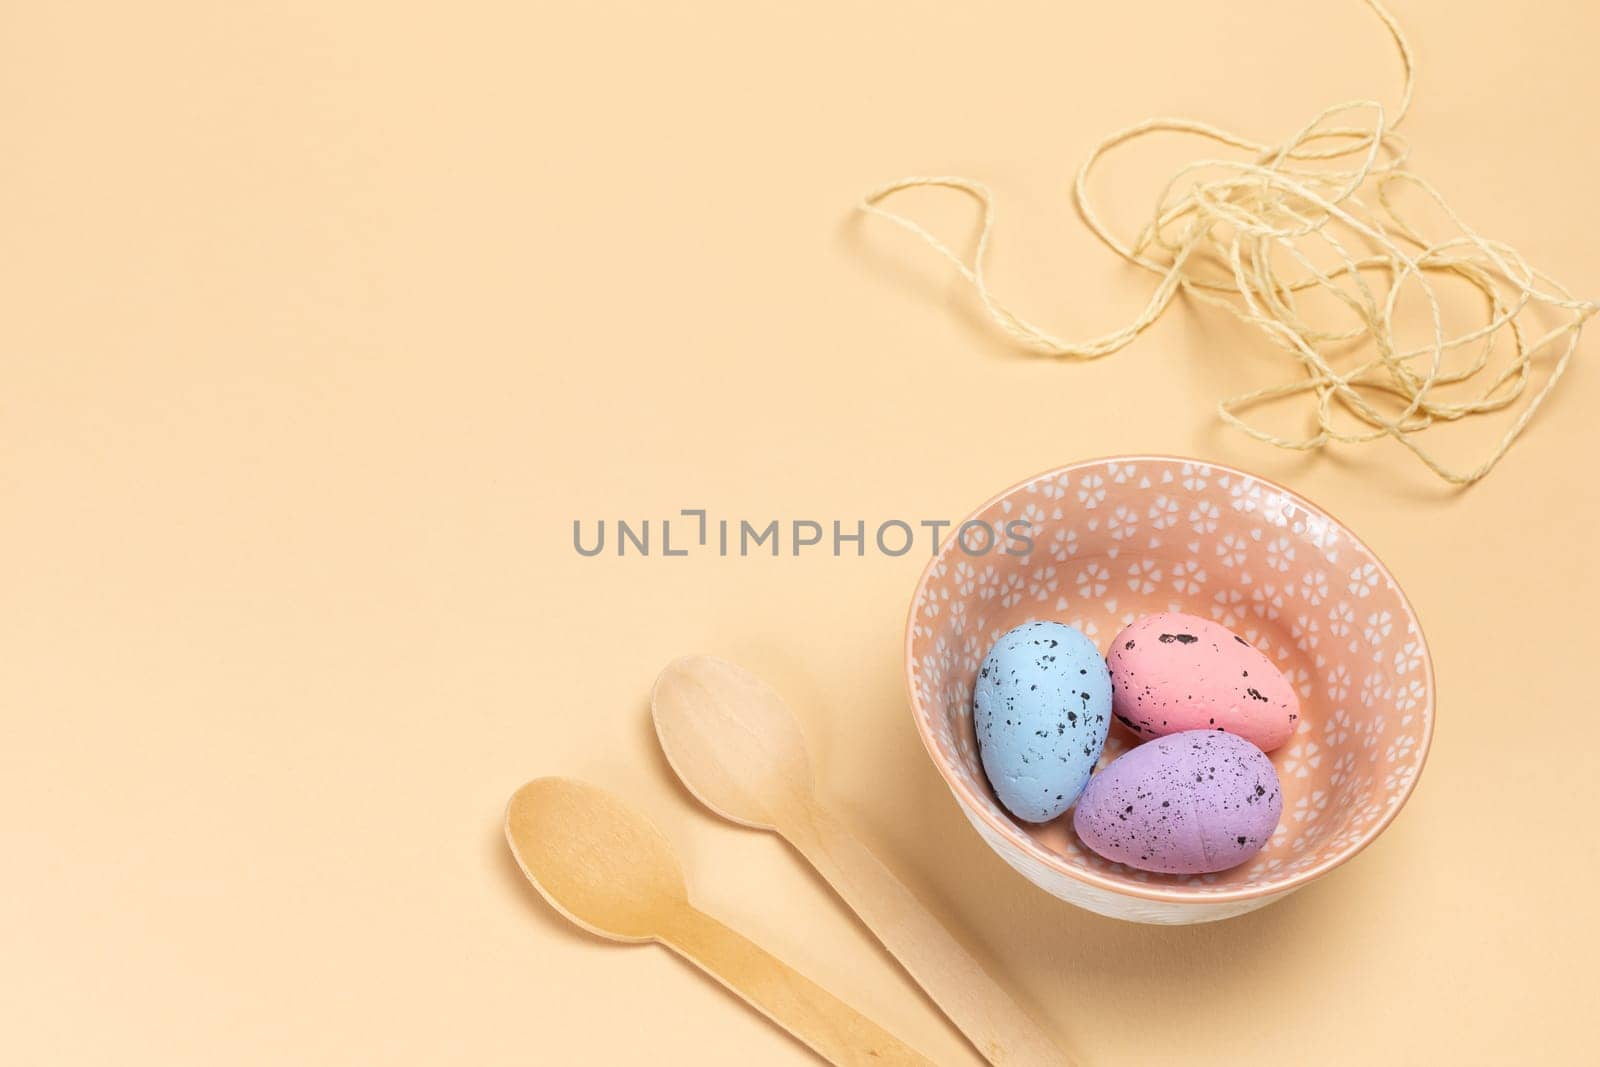 Bowl with colored Easter eggs, wooden spoons and a rope on the beige background. Top view.